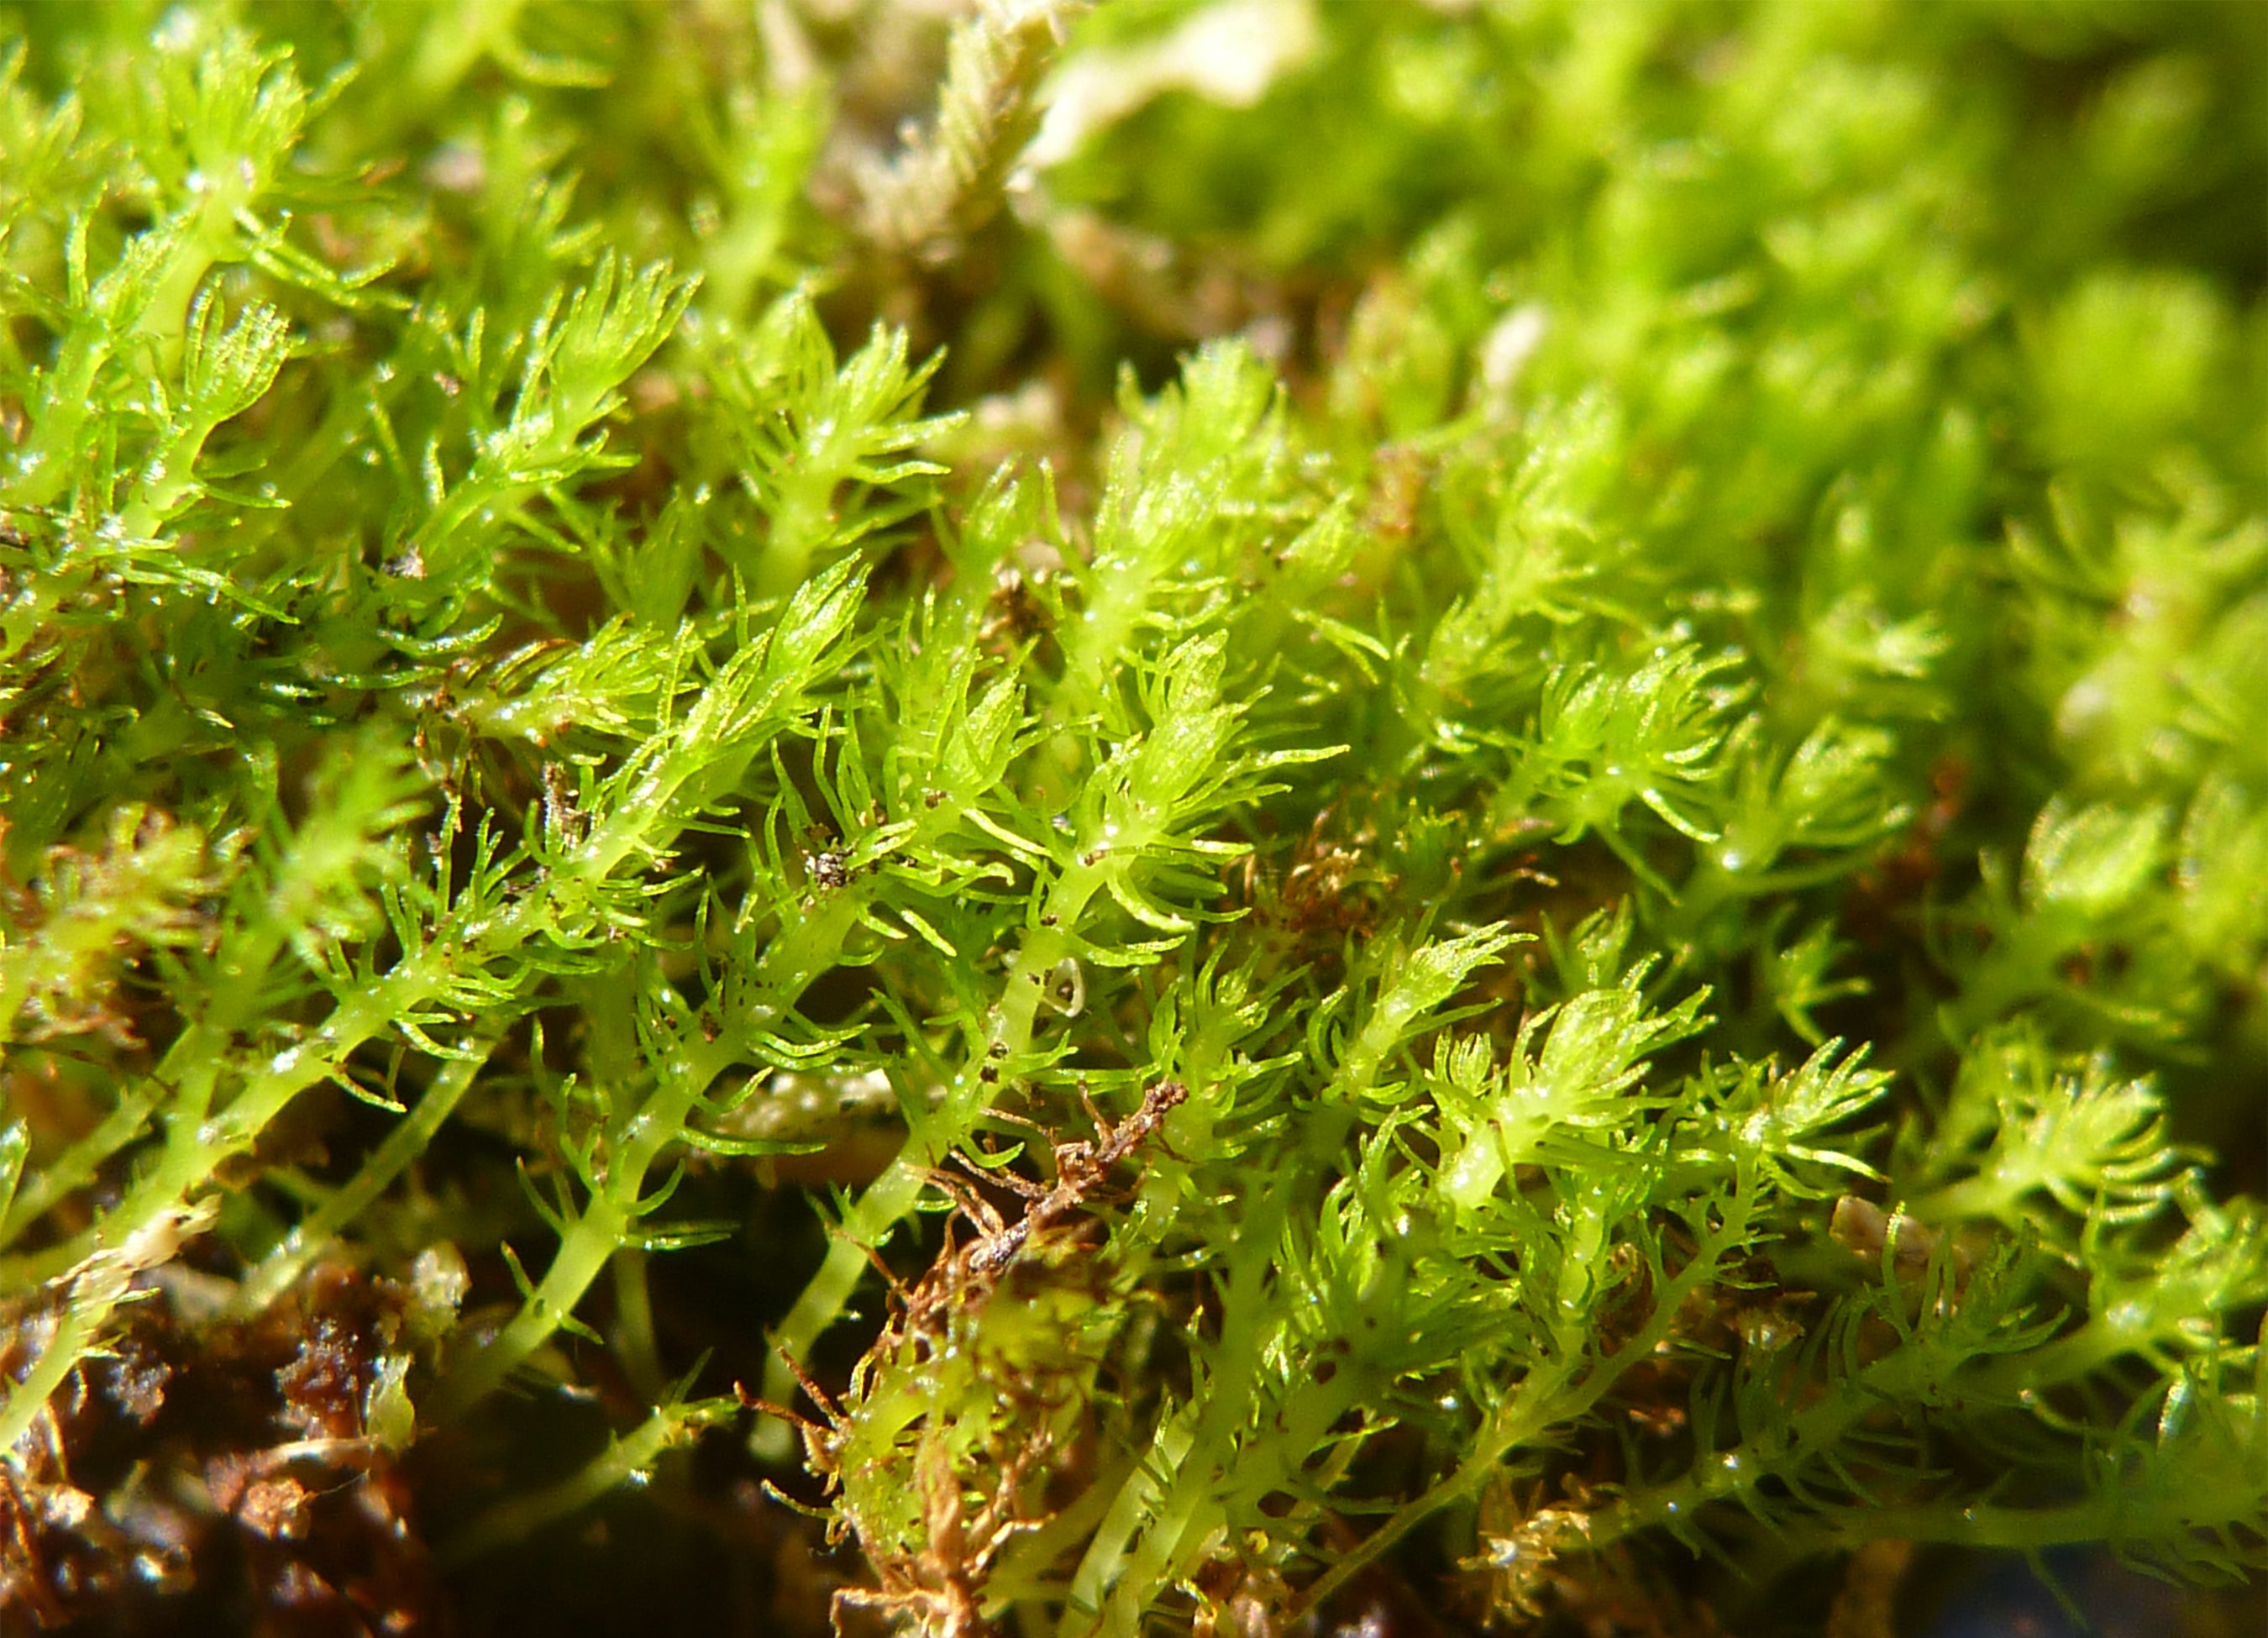 Outside/Inbox: Does moss get damaged when you walk on it?